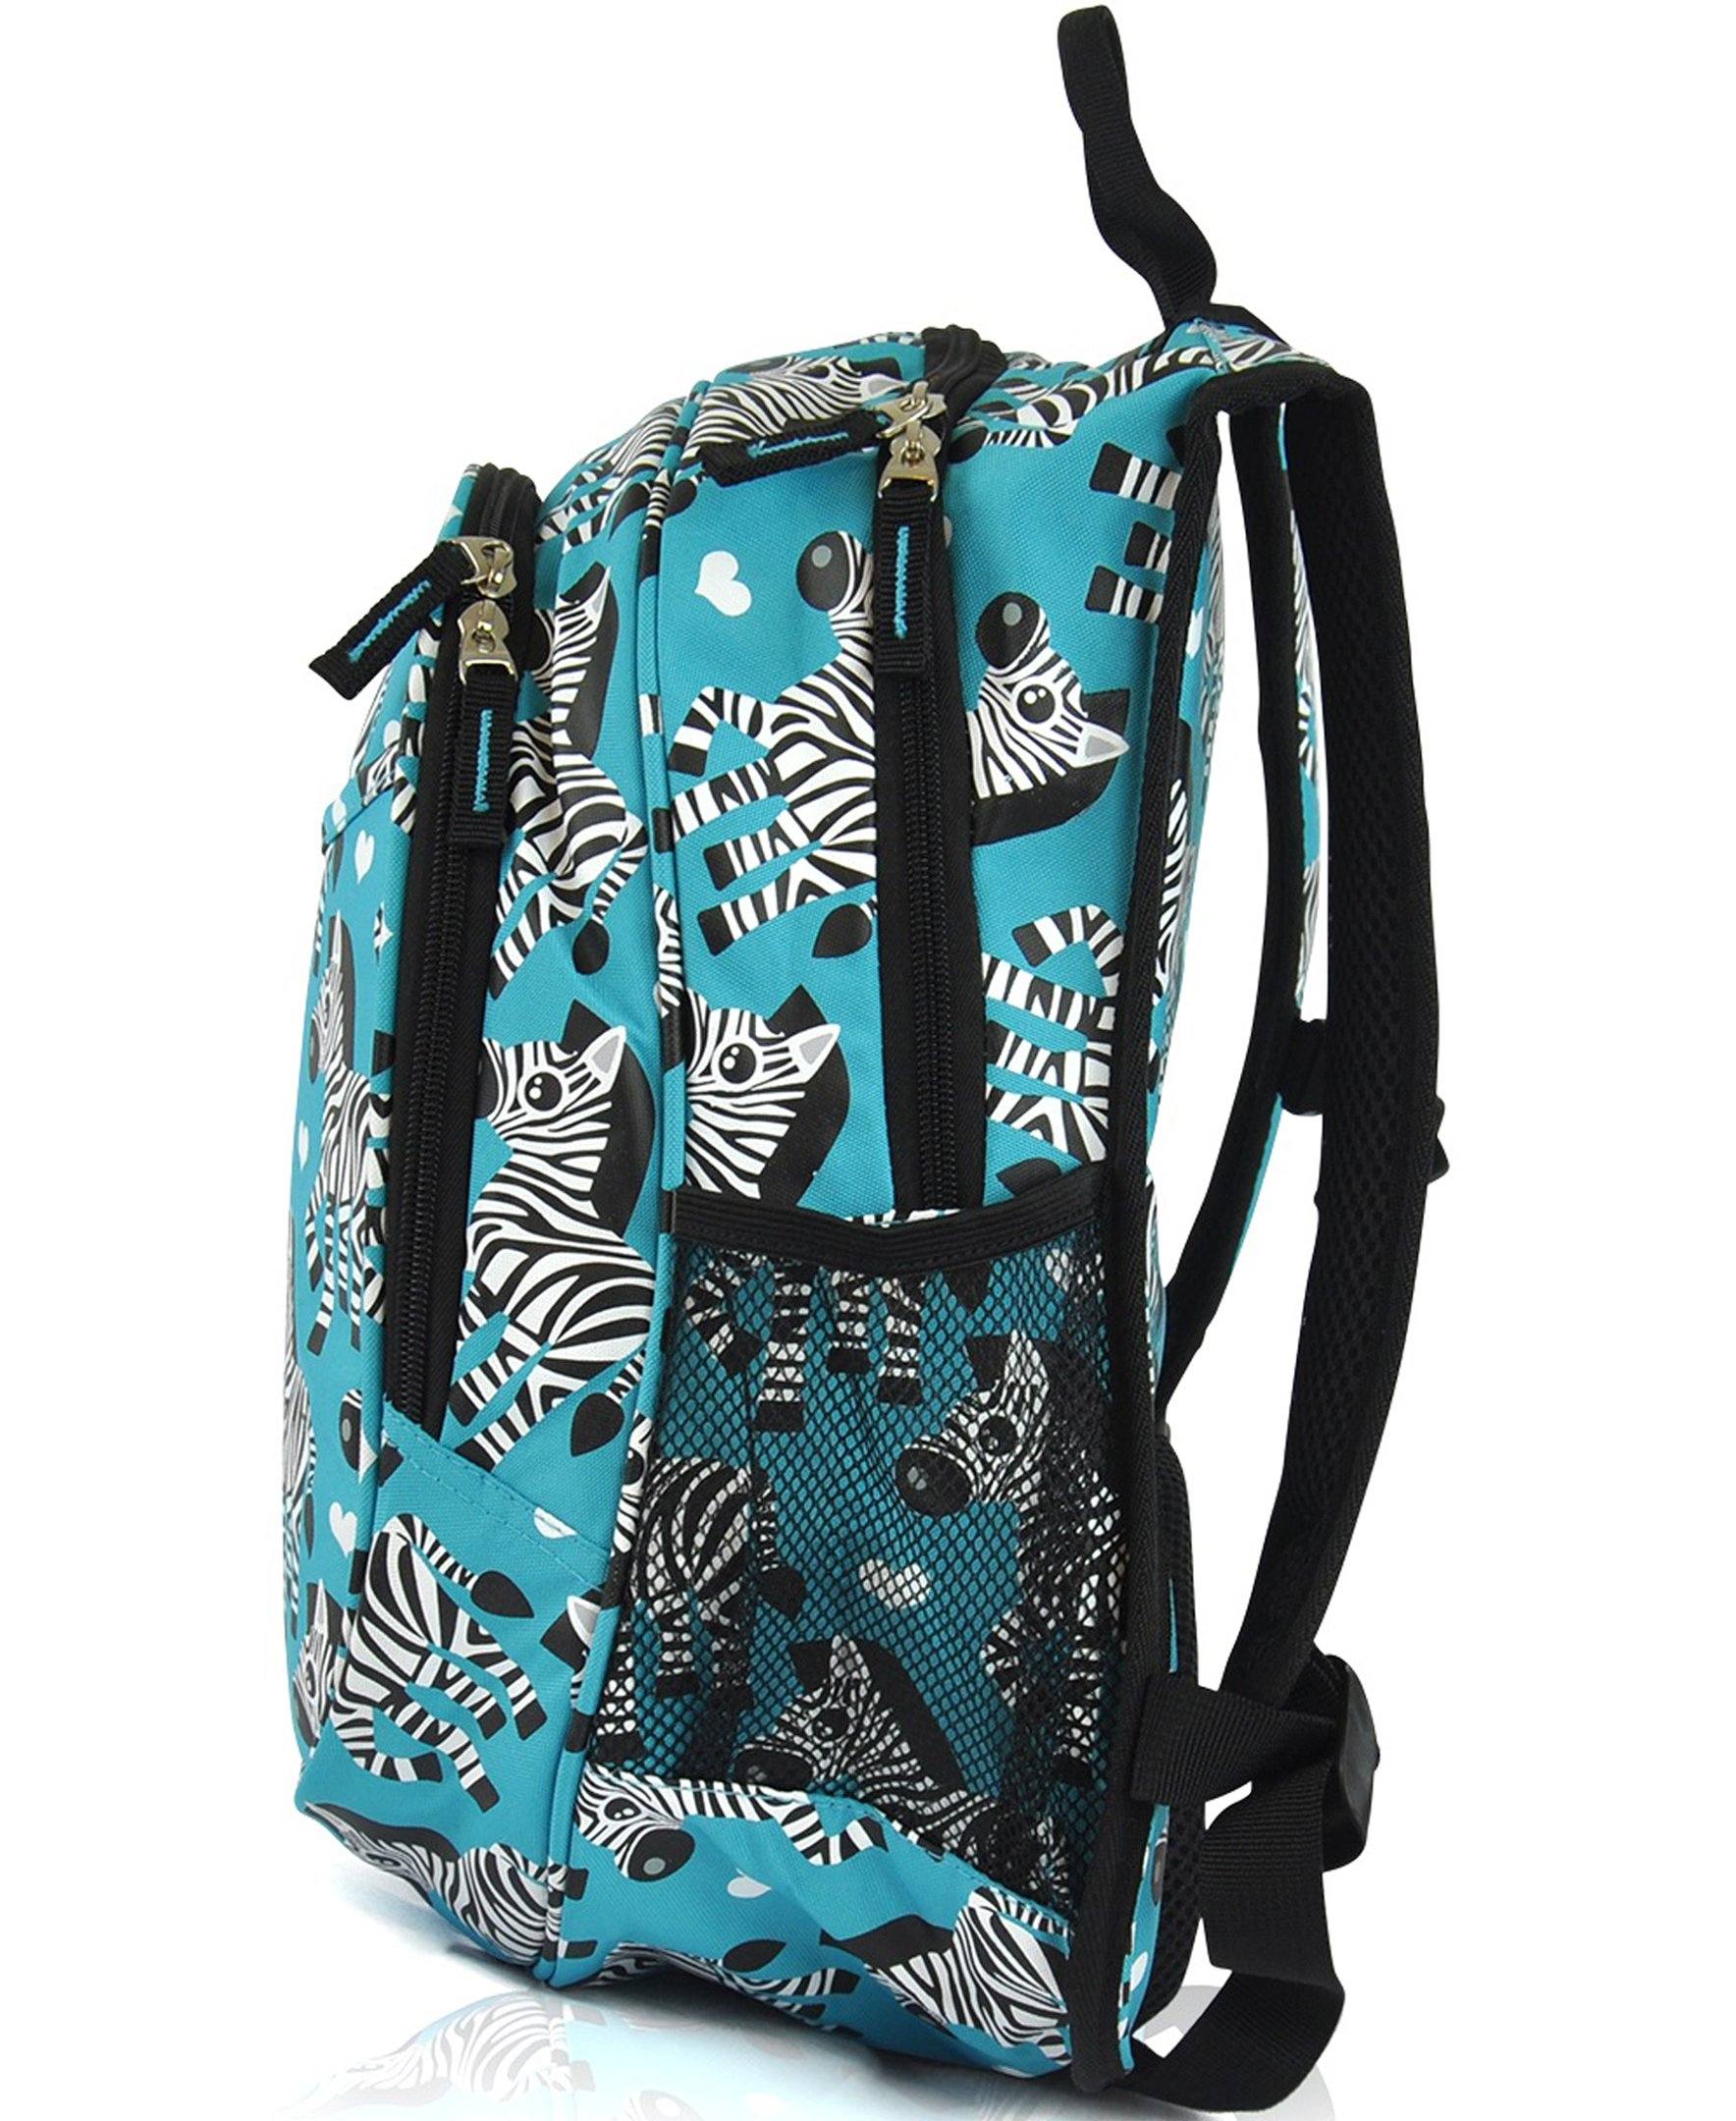 O3KCBP021 Obersee Mini Preschool All-in-One Backpack for Toddlers and Kids with integrated Insulated Cooler | Zebra - image 4 of 5